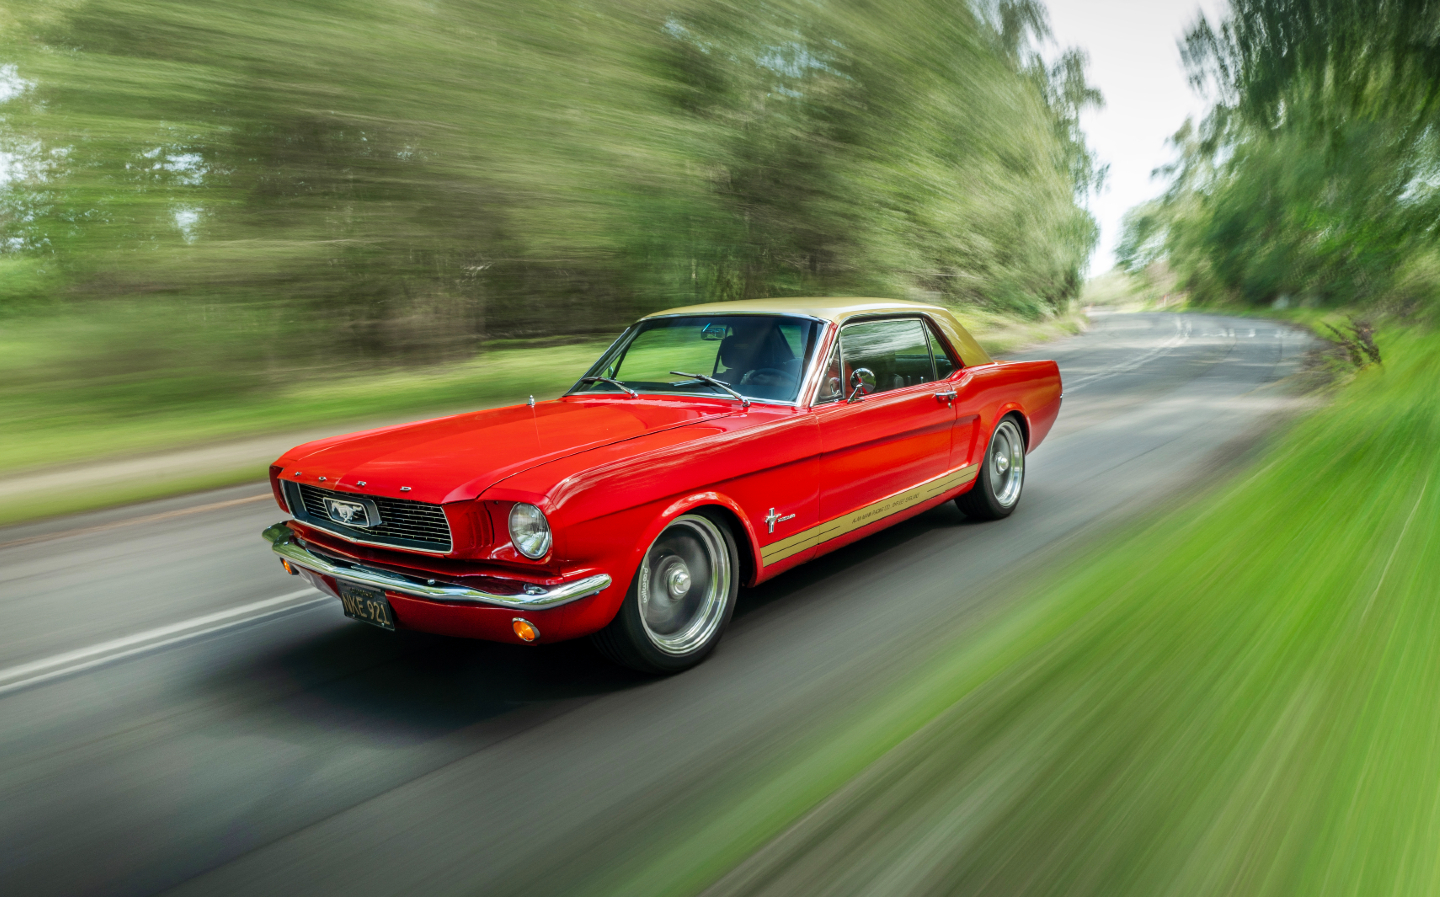 alan mann racing, electric, epower mustang, amr mustang epower review: the 1960s restomod pony car powered by volts rather than a v8